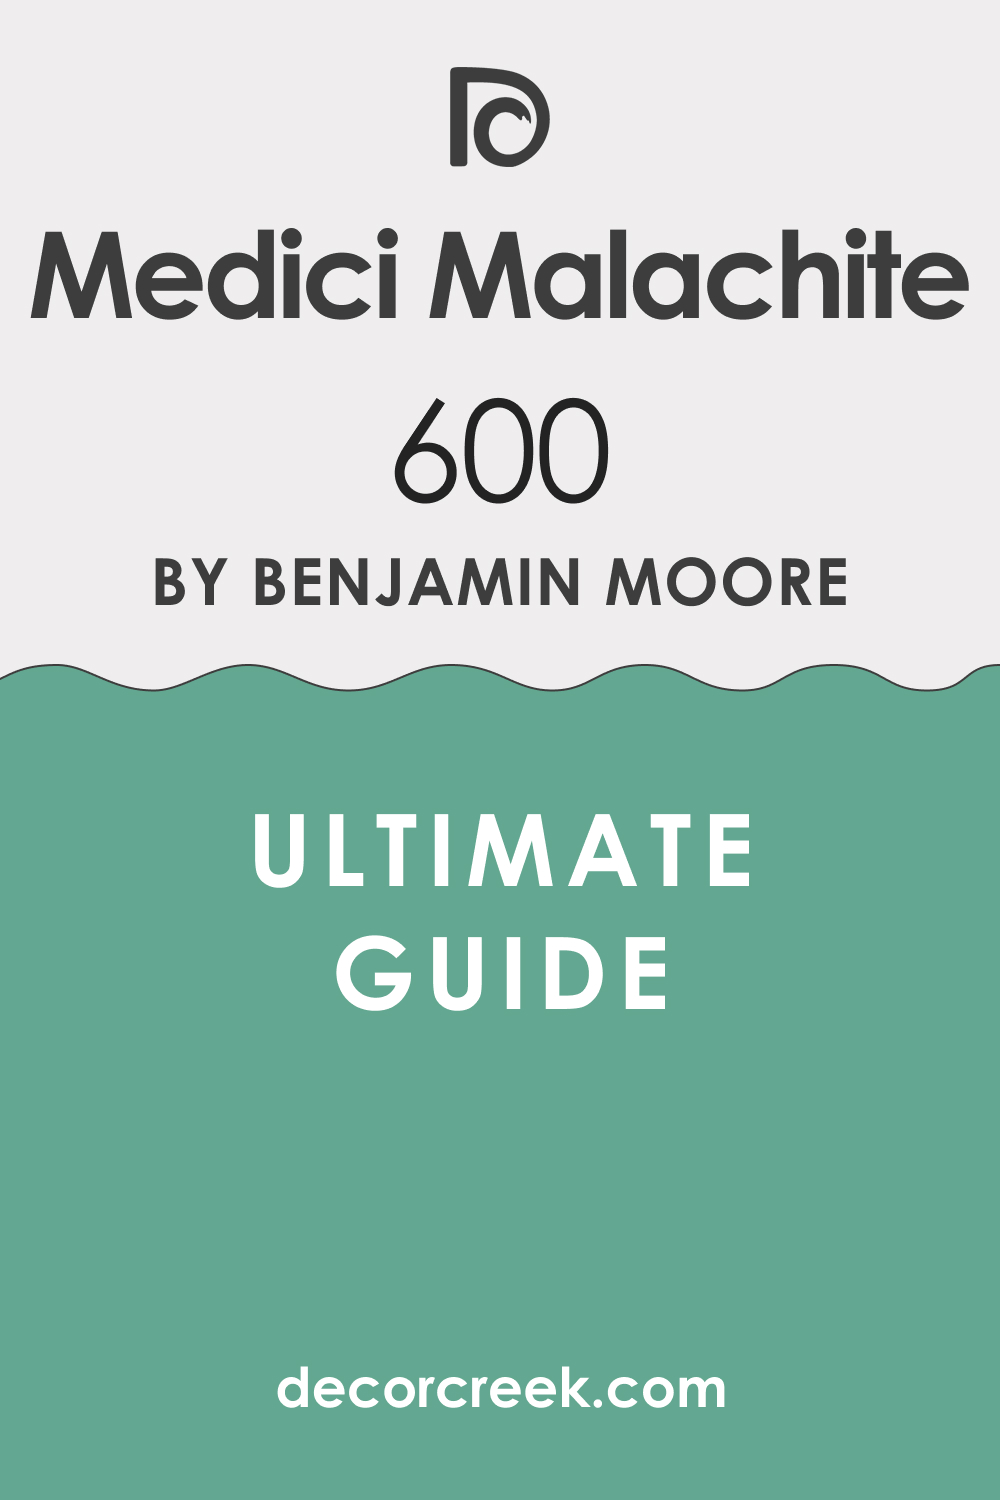 Ultimate Guide. Medici Malachite 600 Paint Color by Benjamin Moore